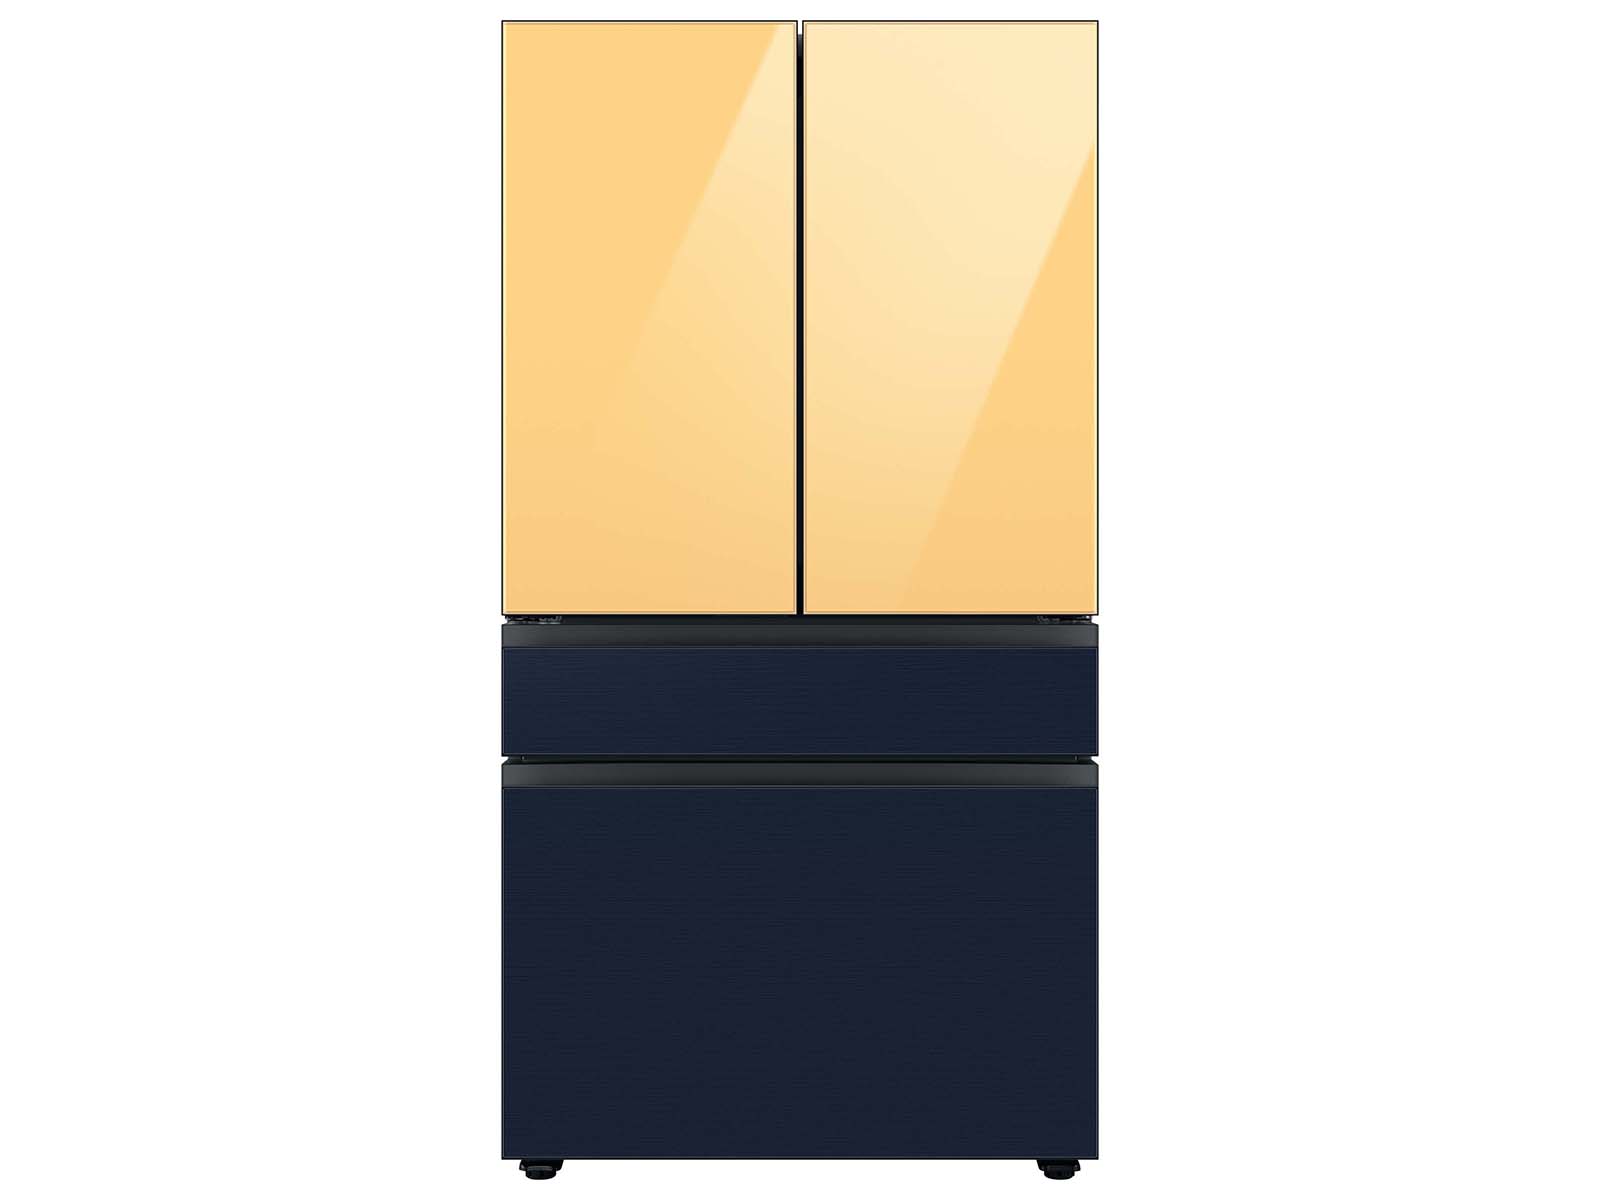 Bespoke 4-Door French Door Refrigerator (23 cu. ft.) with Customizable Door Panel Colors and Beverage Center&trade; in Sunrise Yellow Glass Top, White Glass Middle, and Morning Blue Glass Bottom Panels